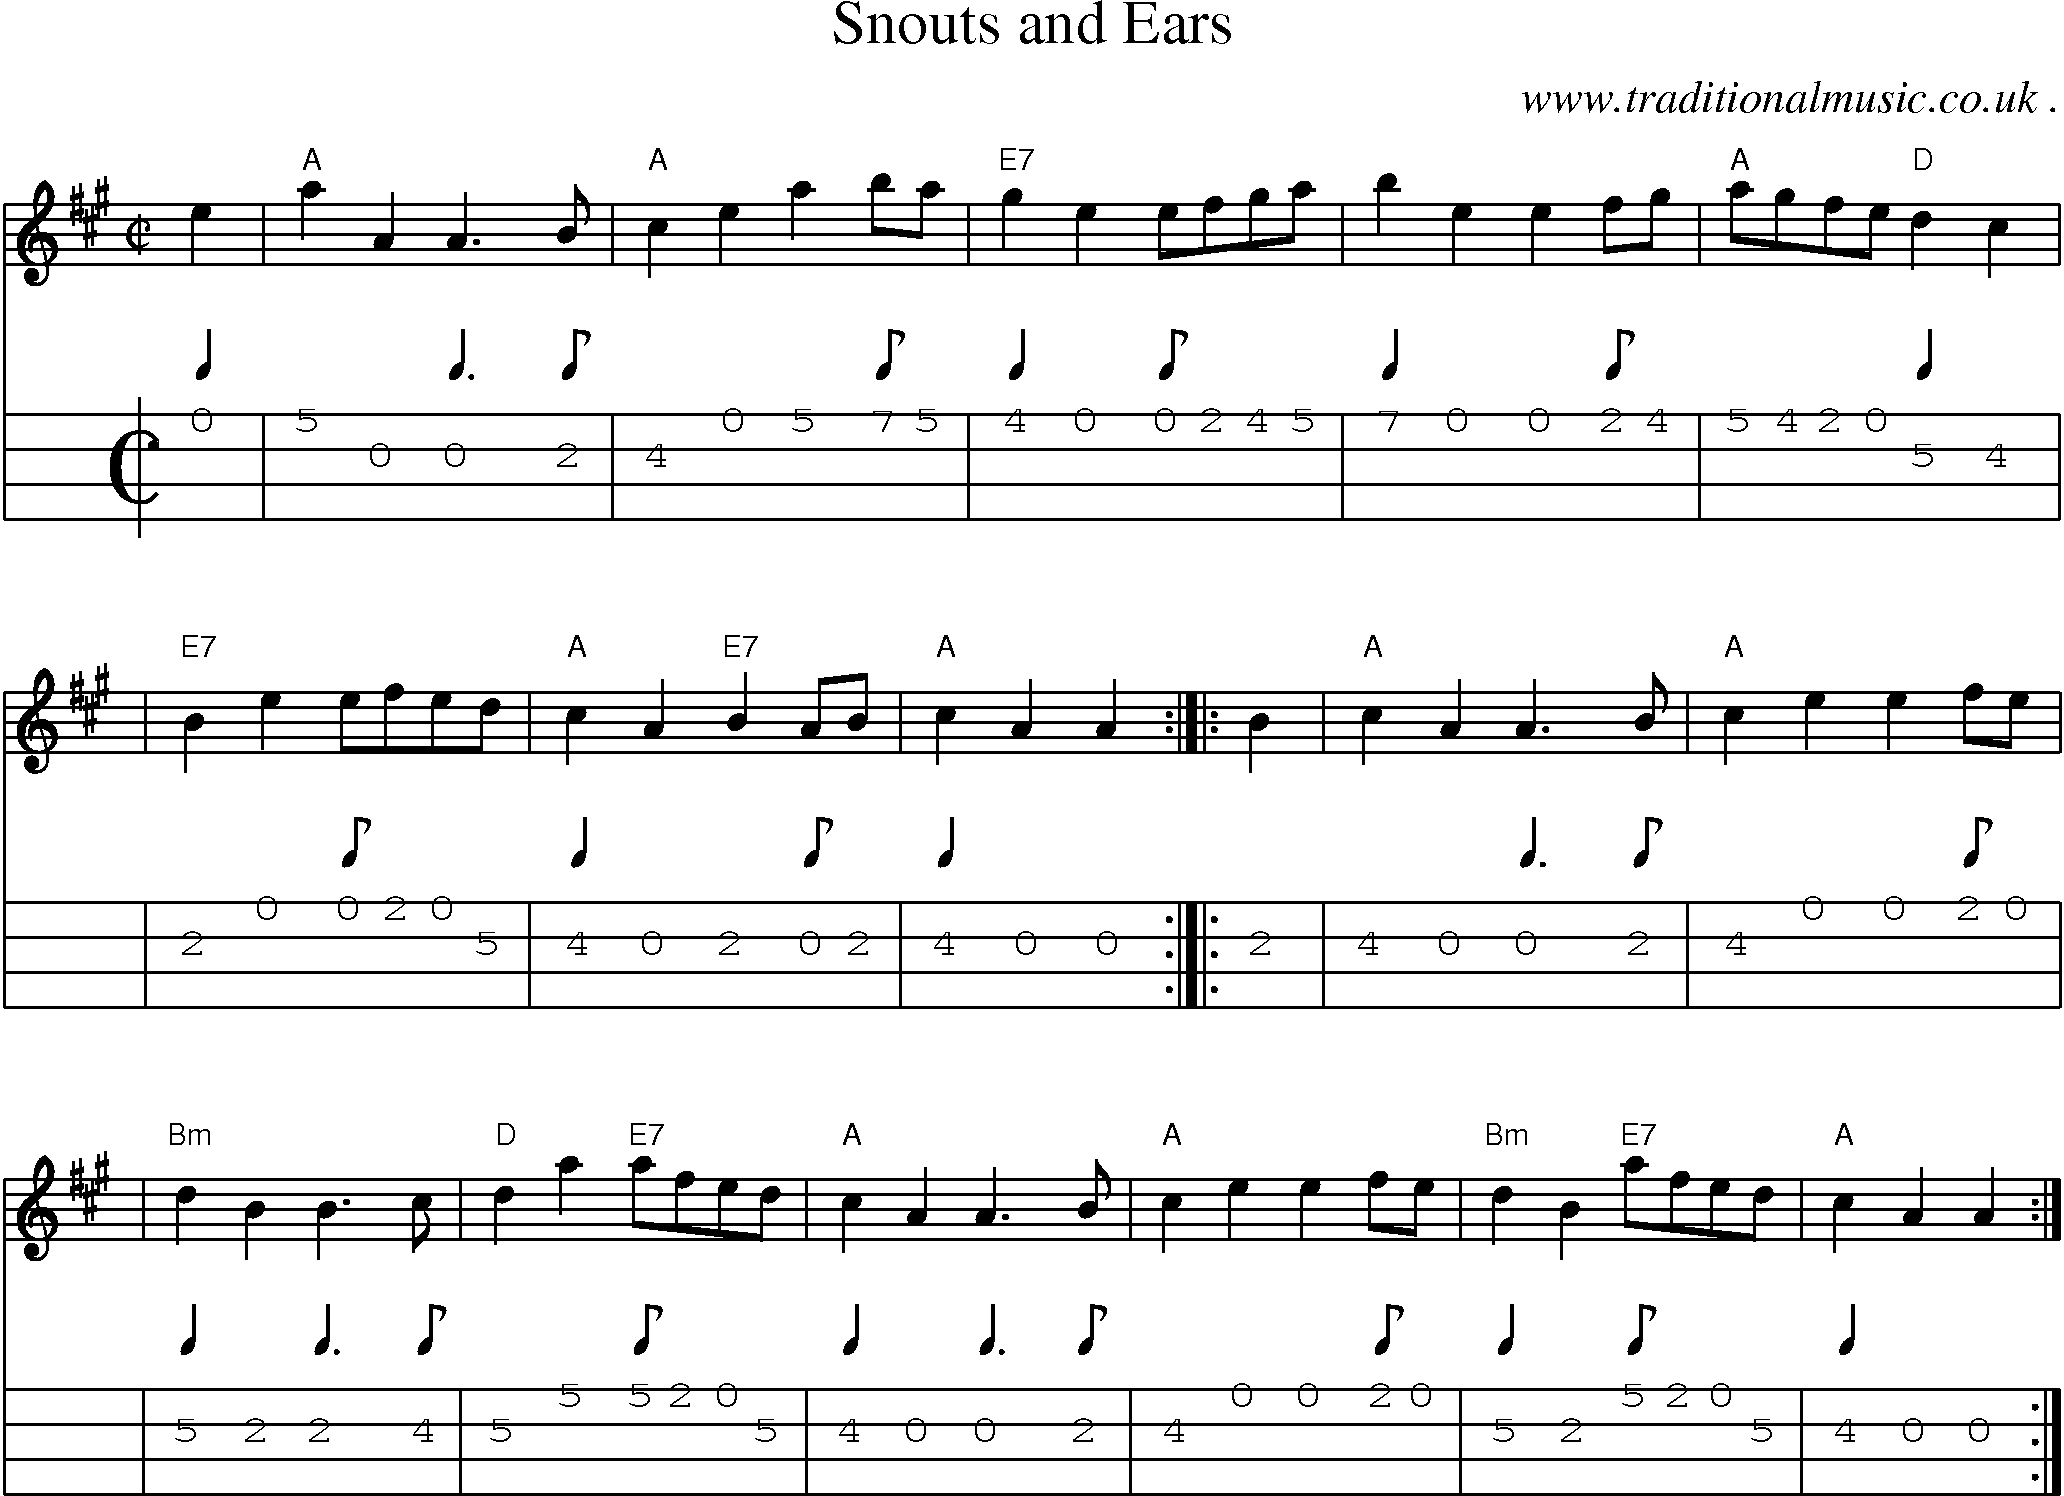 Sheet-music  score, Chords and Mandolin Tabs for Snouts And Ears